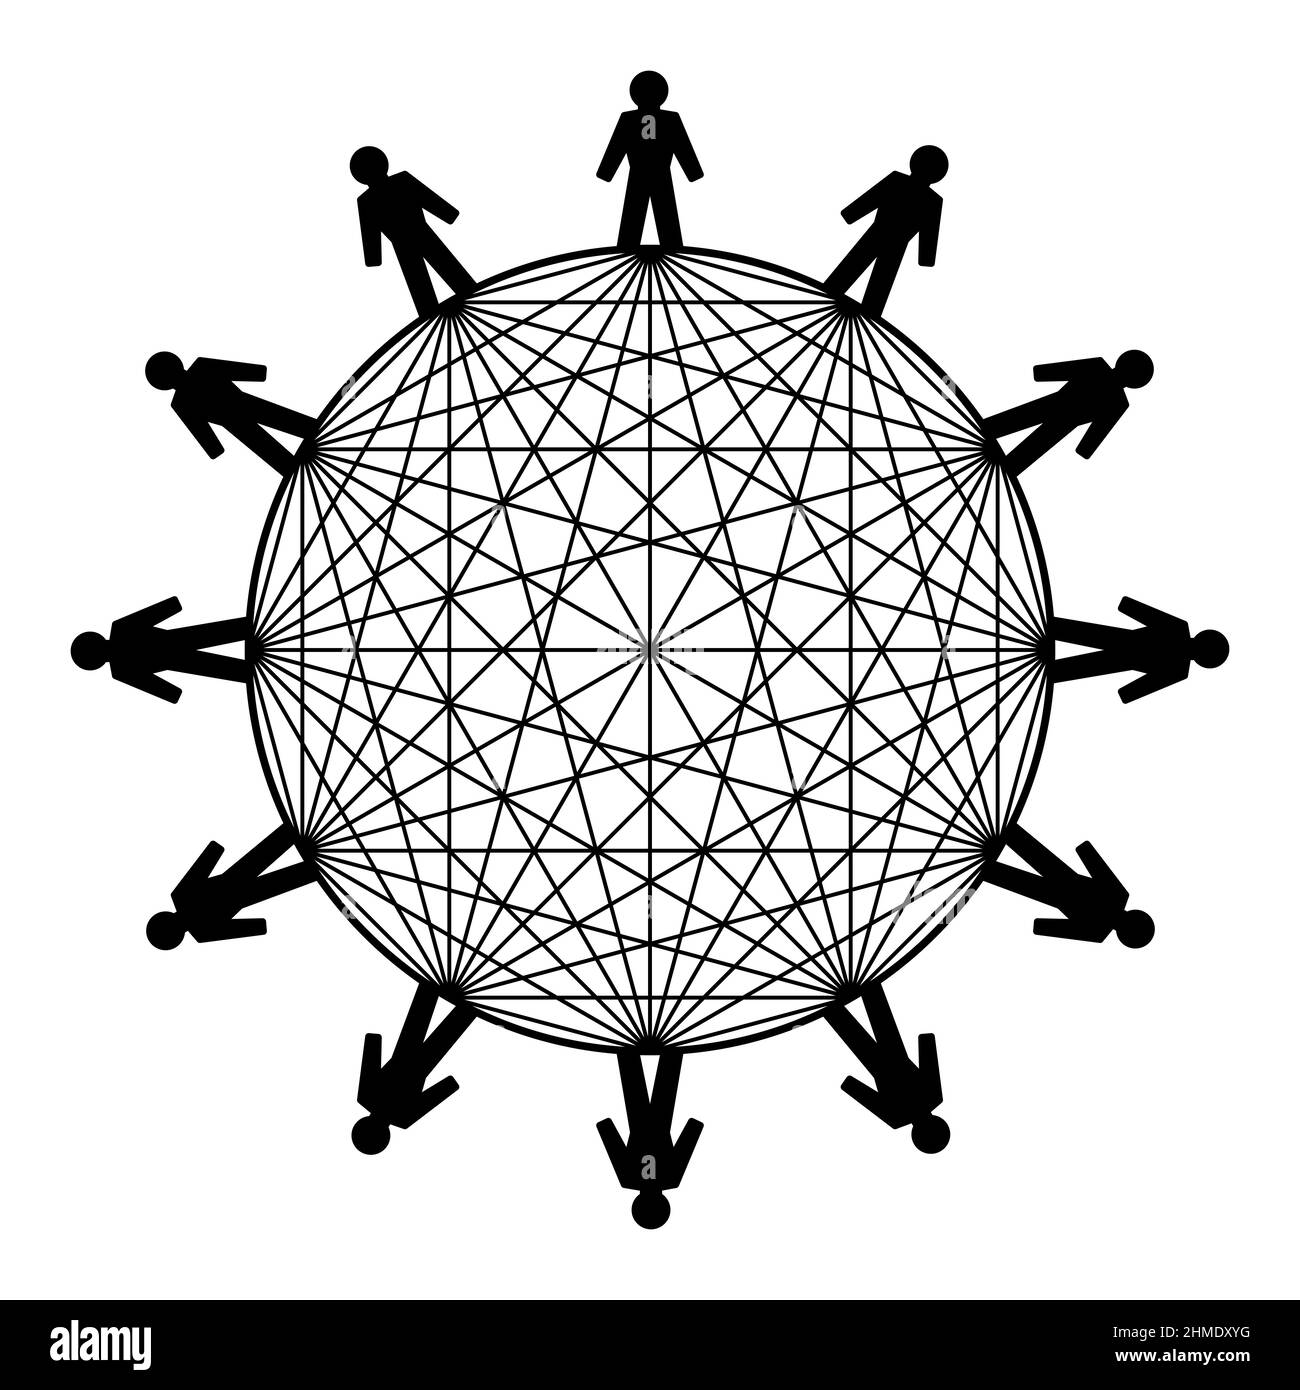 Symbol for the power of networking. Twelve people standing in a circle, connected with lines. The number of unique possible connections is 66. Stock Photo